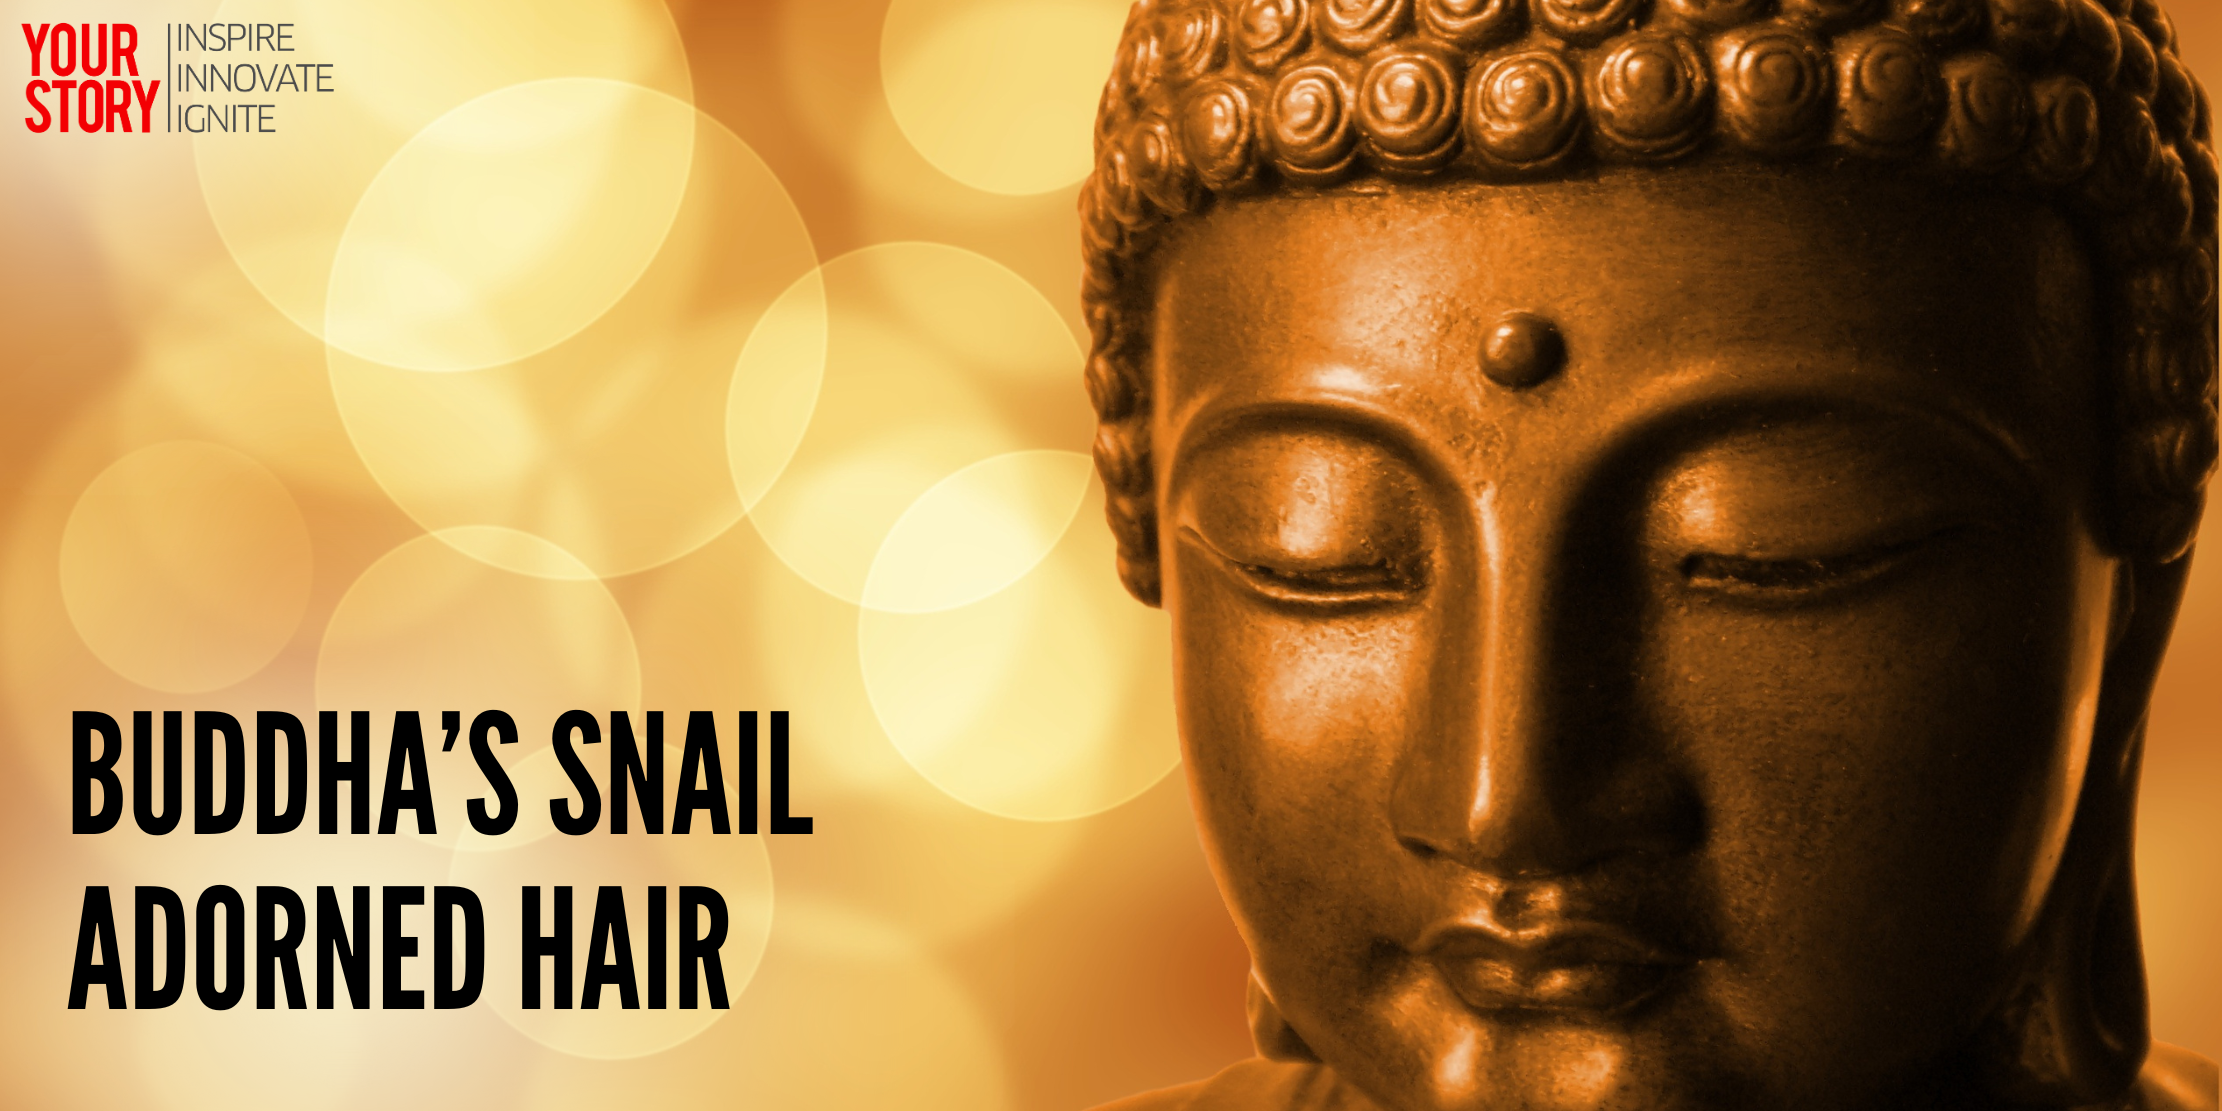 ⁠The Story Behind Buddha's Snail-Adorned Hair